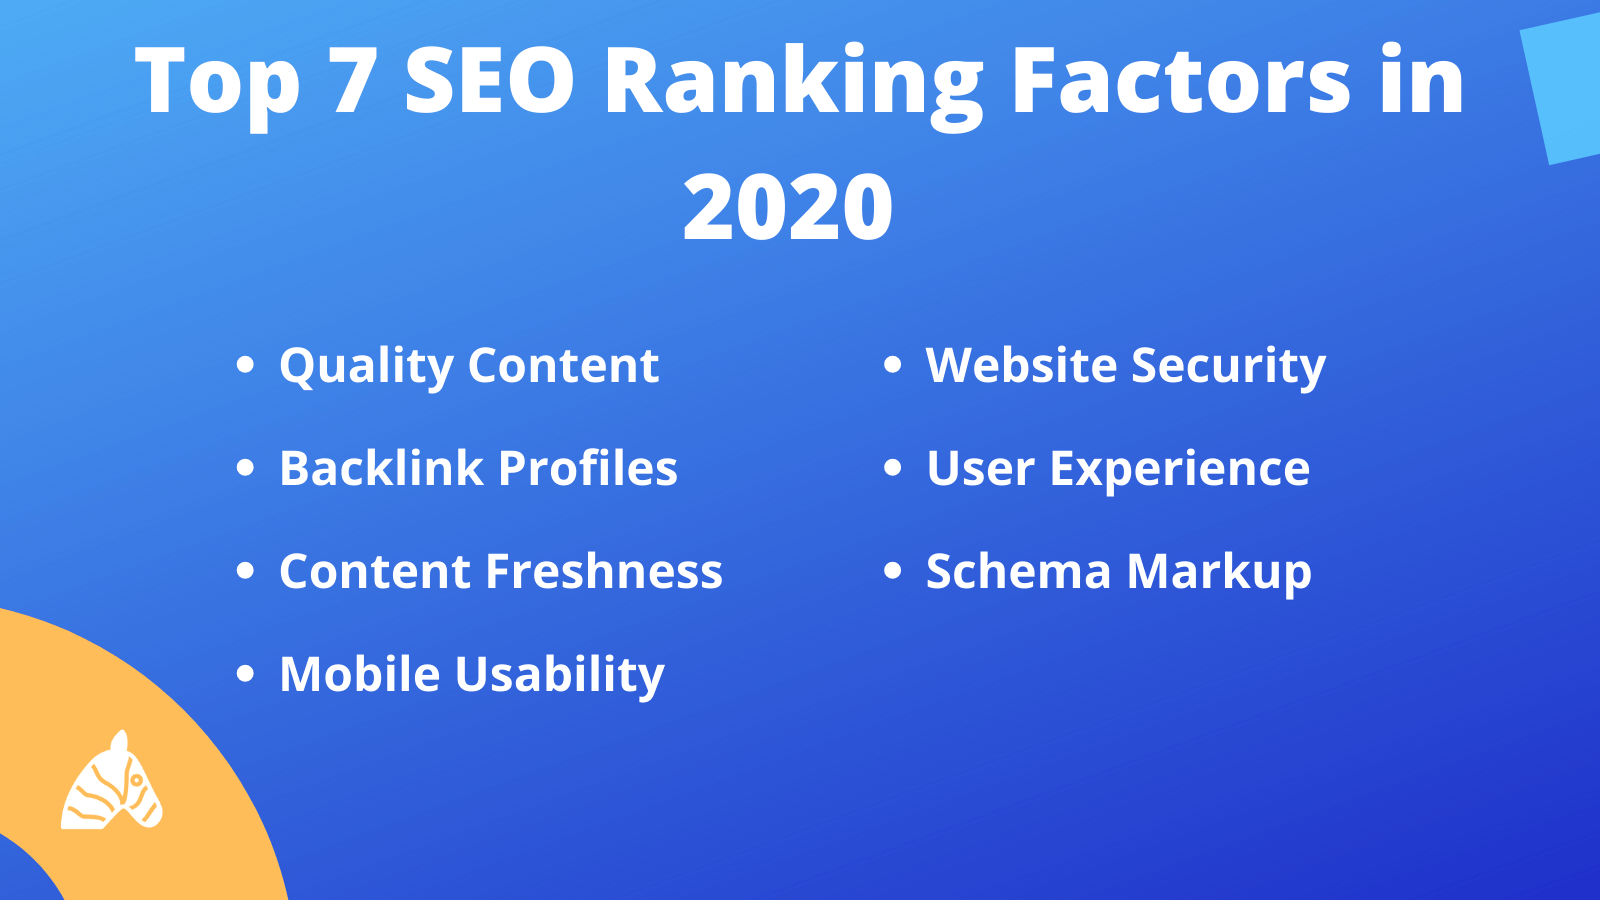 Top 7 SEO ranking factors in 2020 divided into sub-categories